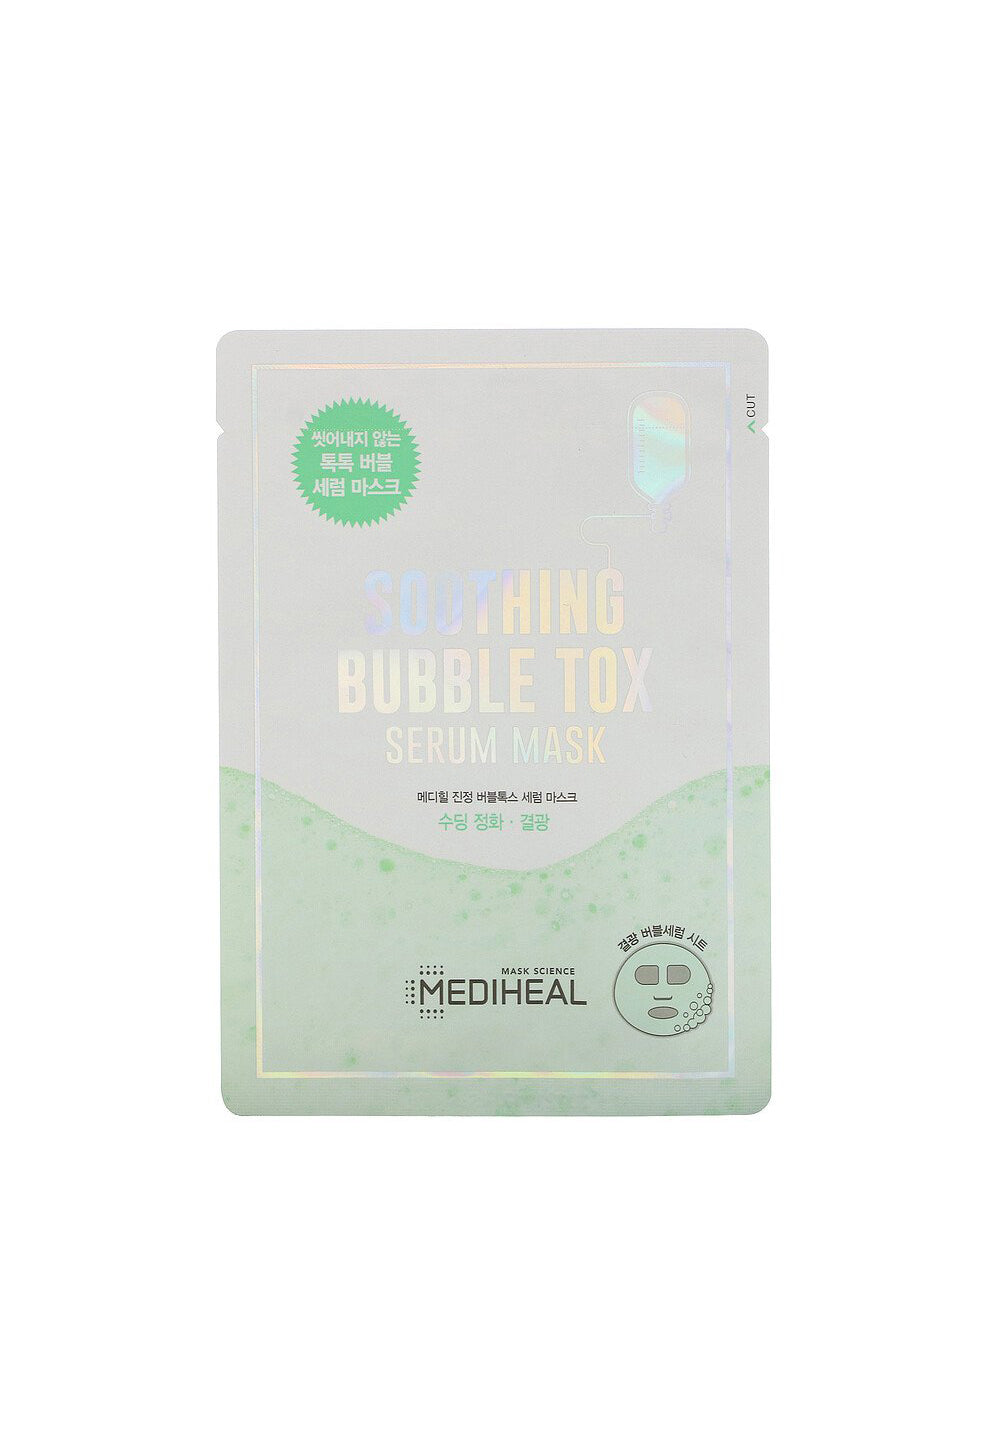 Soothing Bubble Tox Serum Mask, 1 Sheet, 18 ml